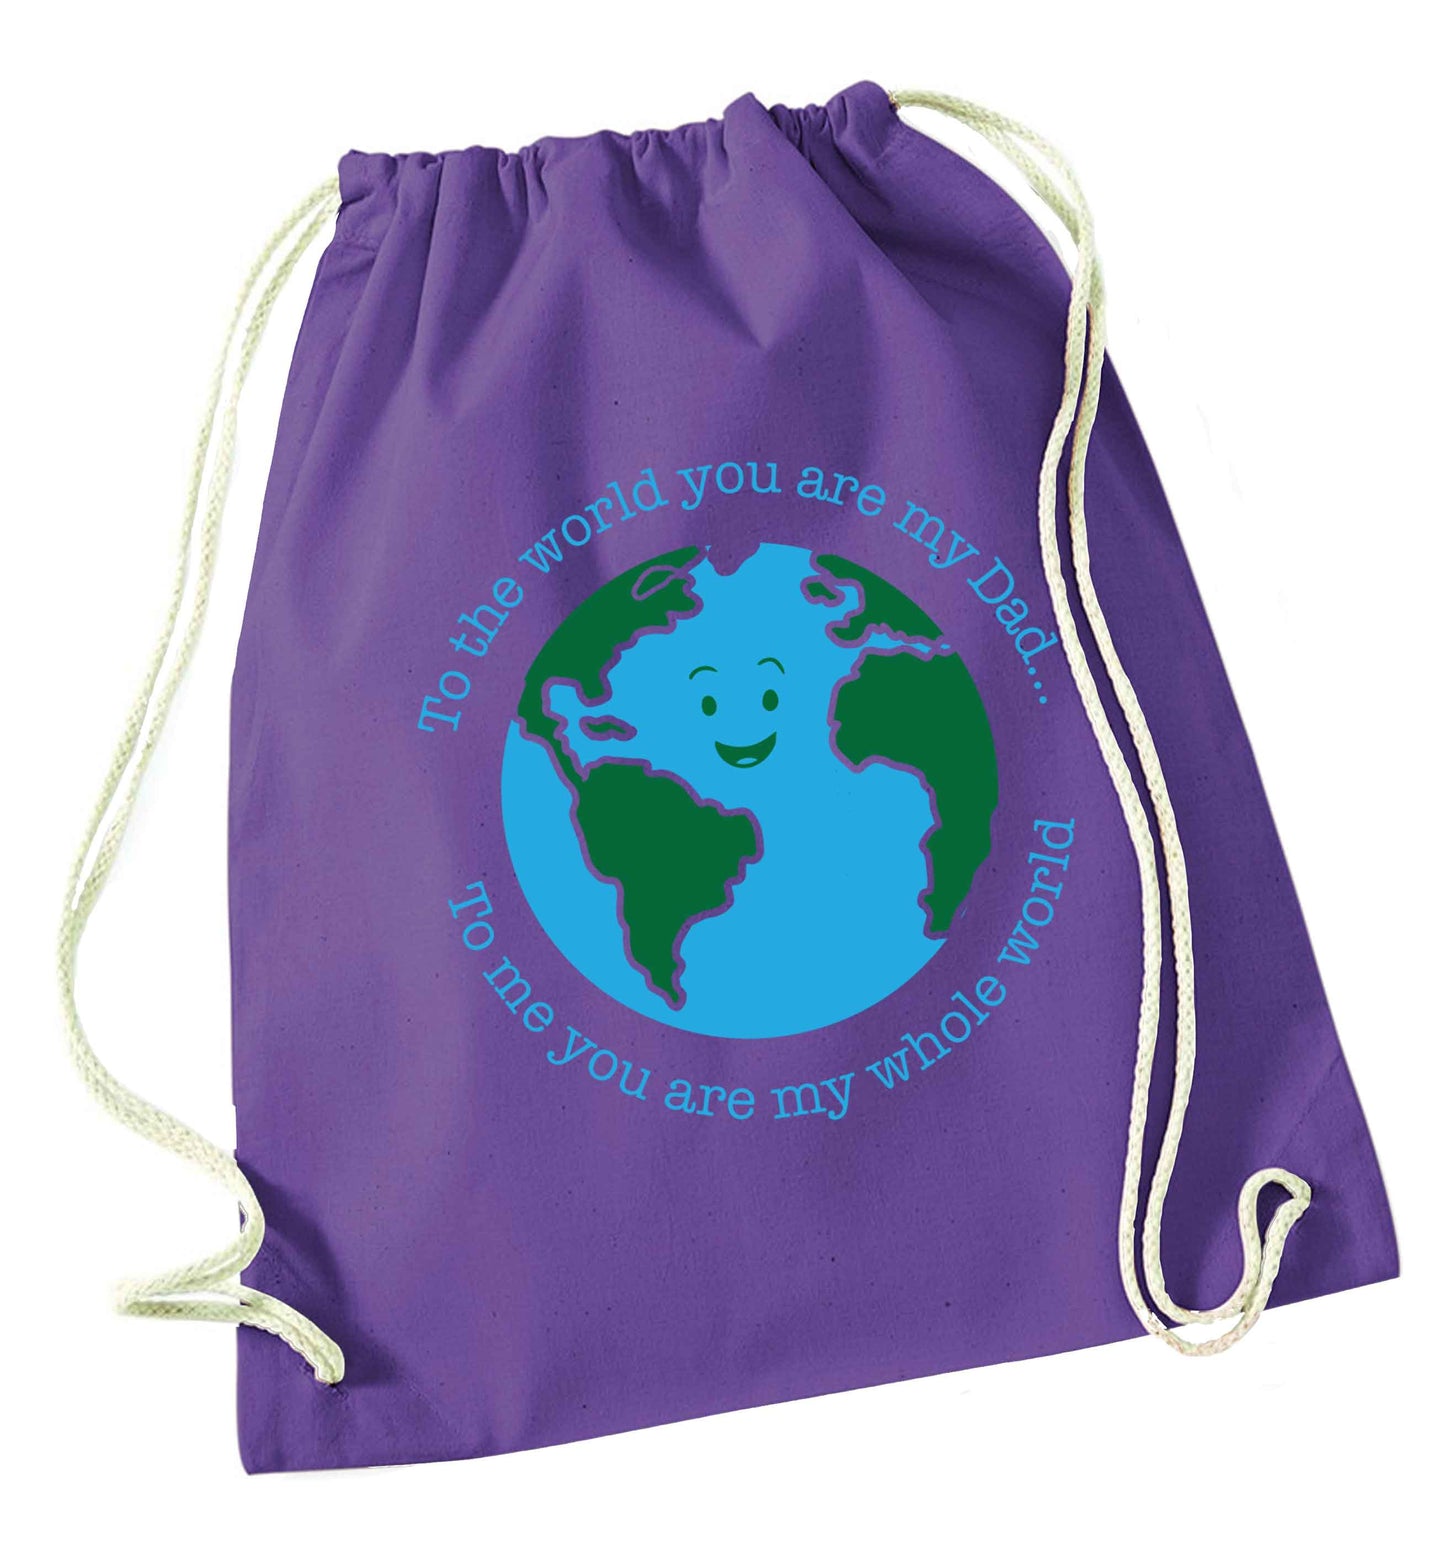 To the world you are my dad, to me you are my whole world purple drawstring bag